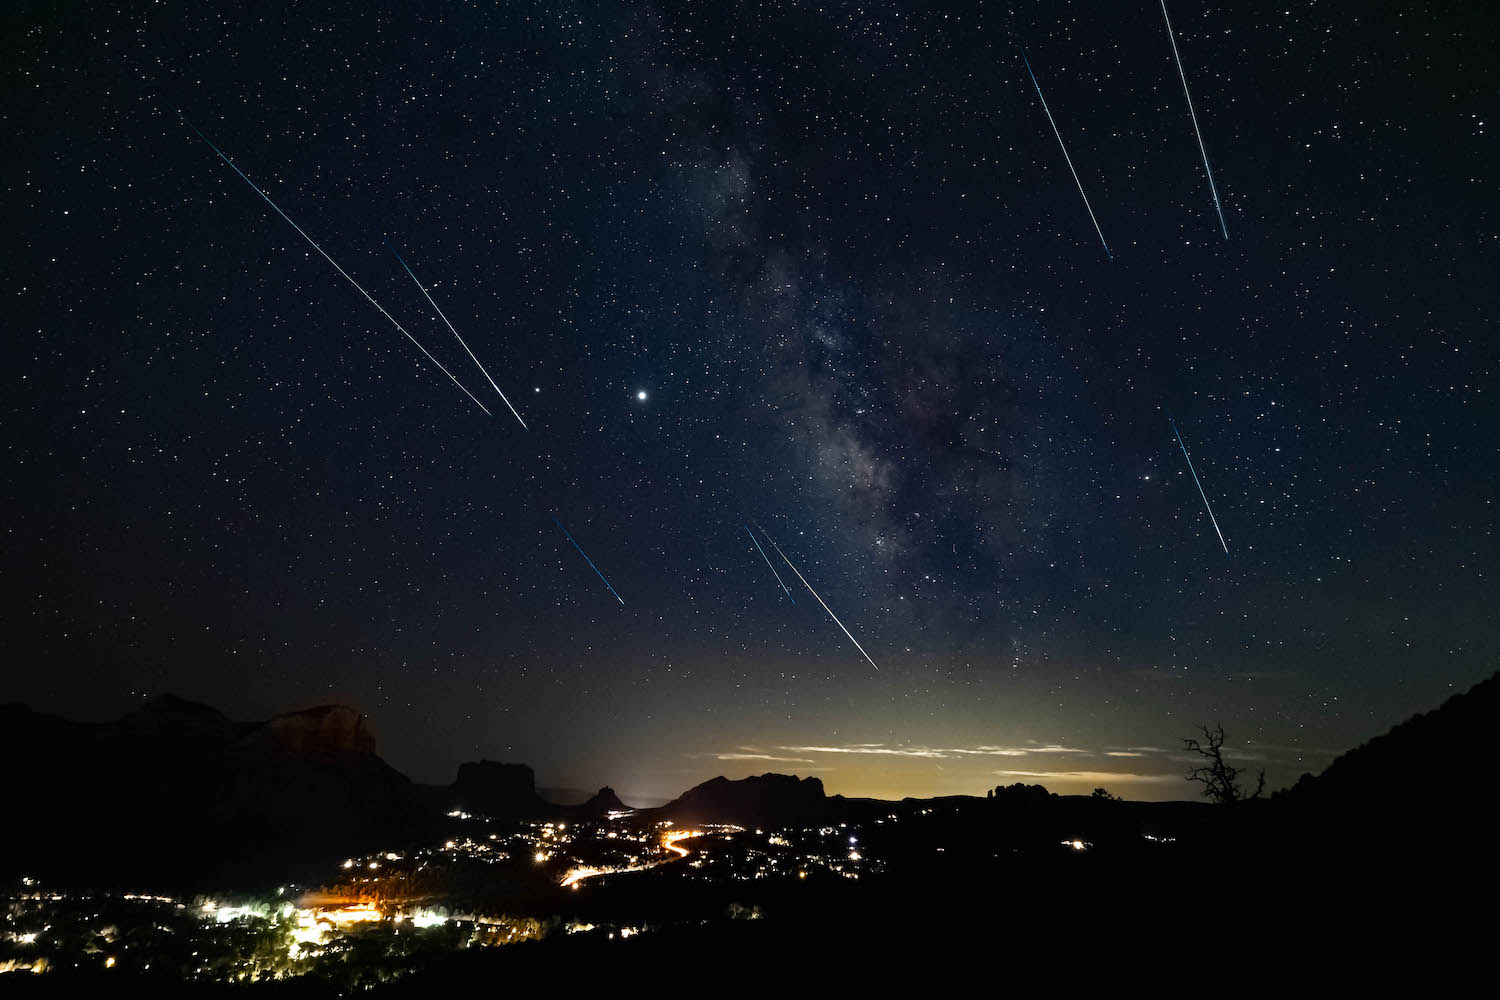 San Franciscos Best Dark-Sky Spots for Seeing the Perseids